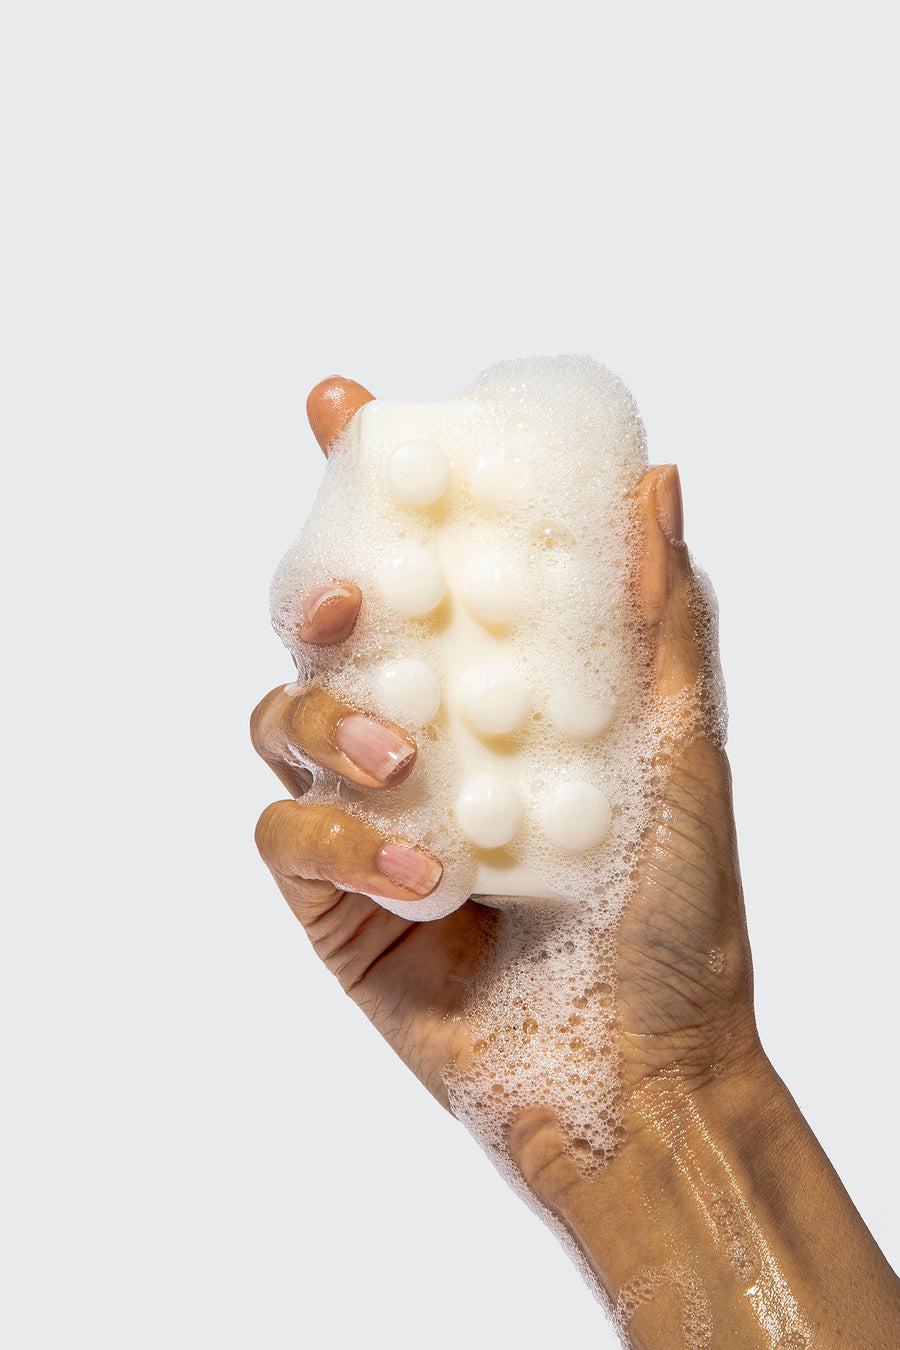 hand holding bar of soap with white sudsy lather dripping down